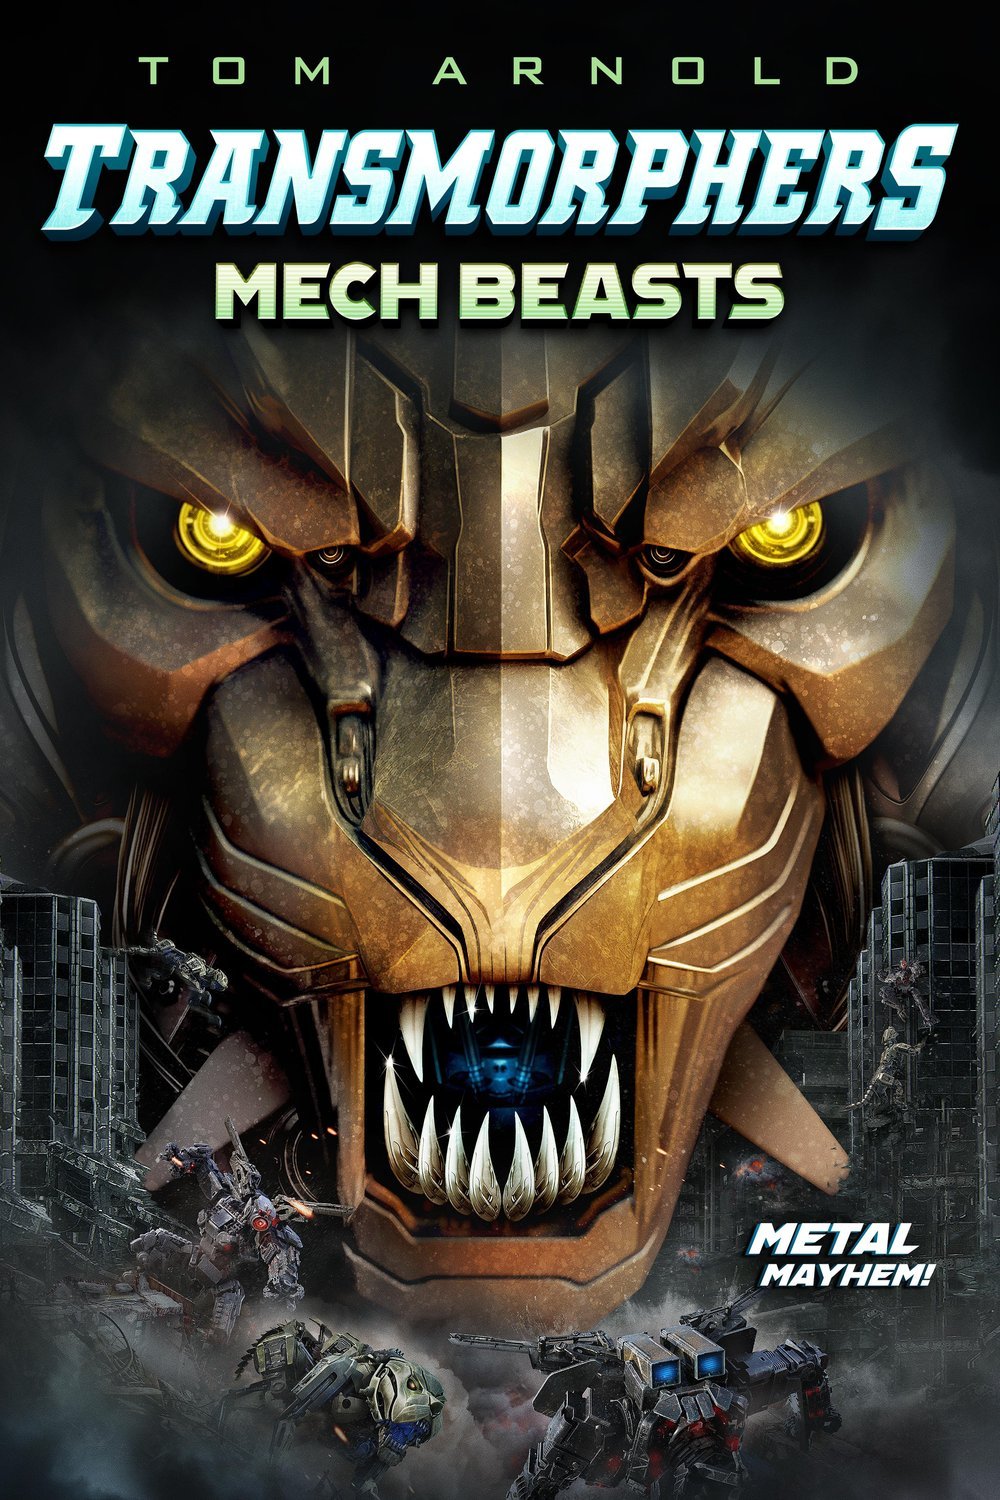 Poster of the movie Transmorphers: Mech Beasts